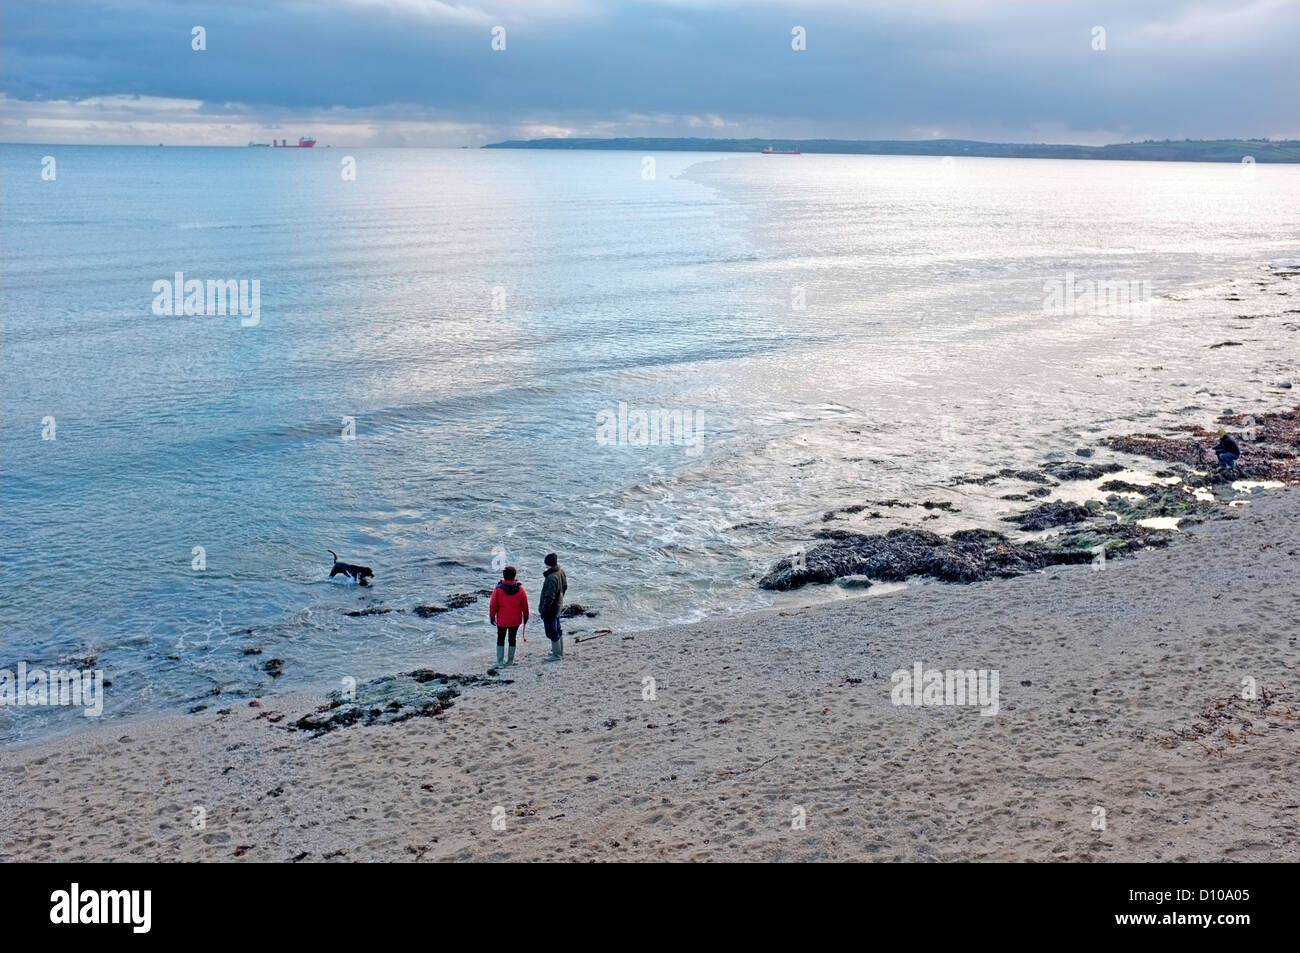 Two people with their dog on an empty beach Gyllyngvase beach in Falmouth, Cornwall, UK in the winter. Stock Photo